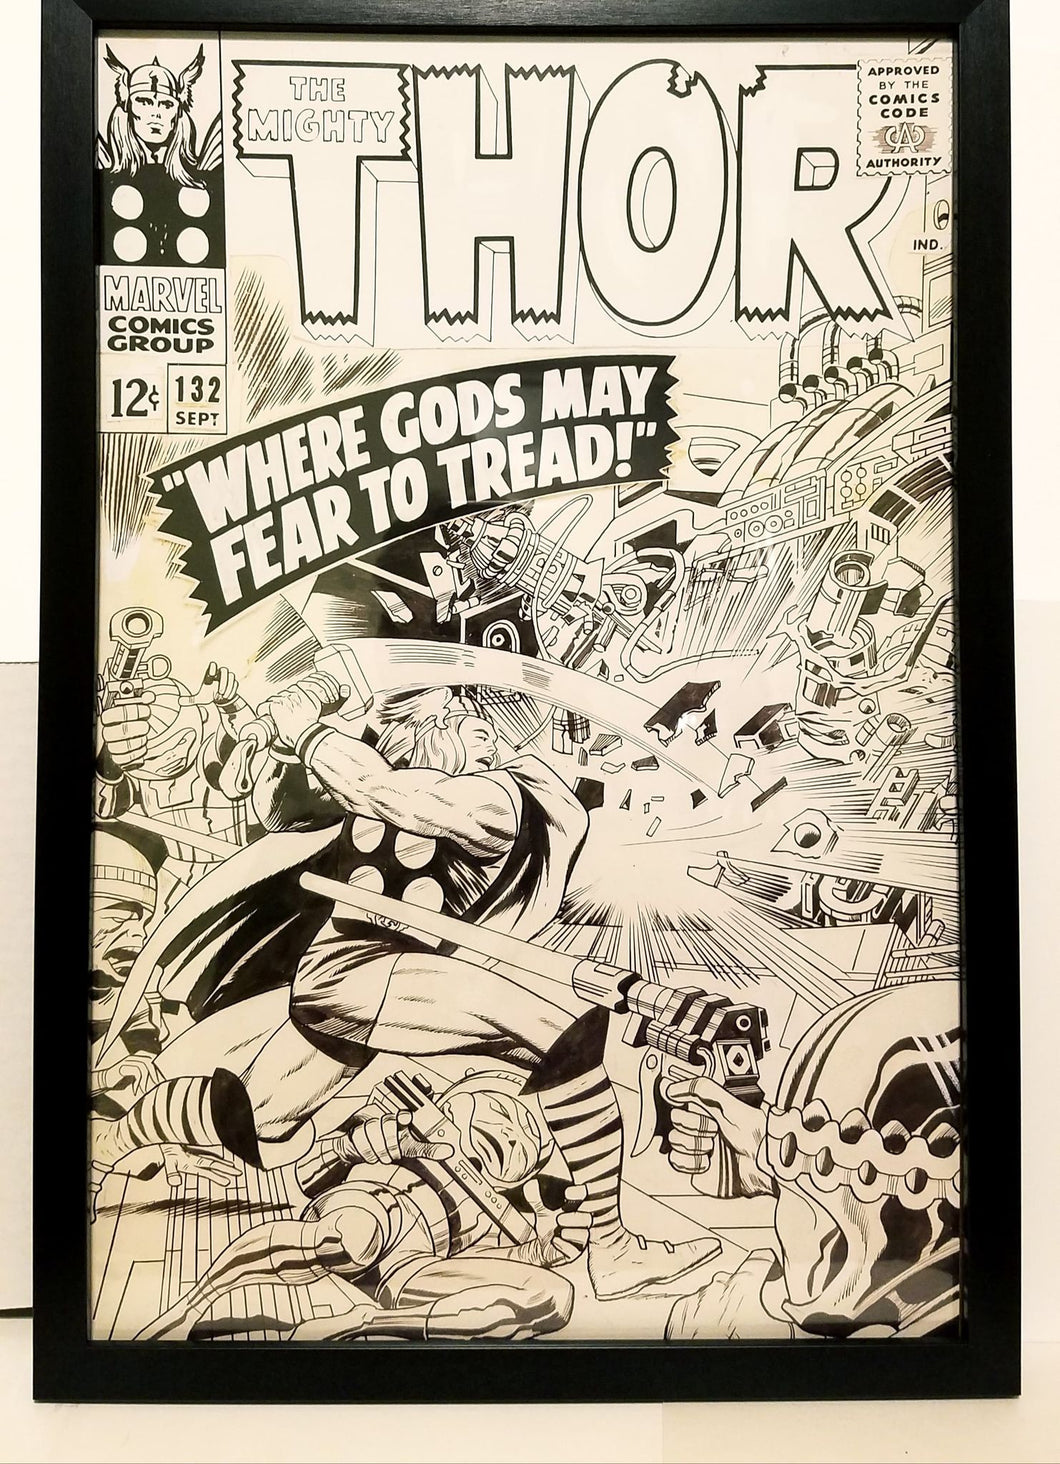 Mighty Thor #132 by Jack Kirby 12x18 FRAMED Original Art Poster Marvel Comics